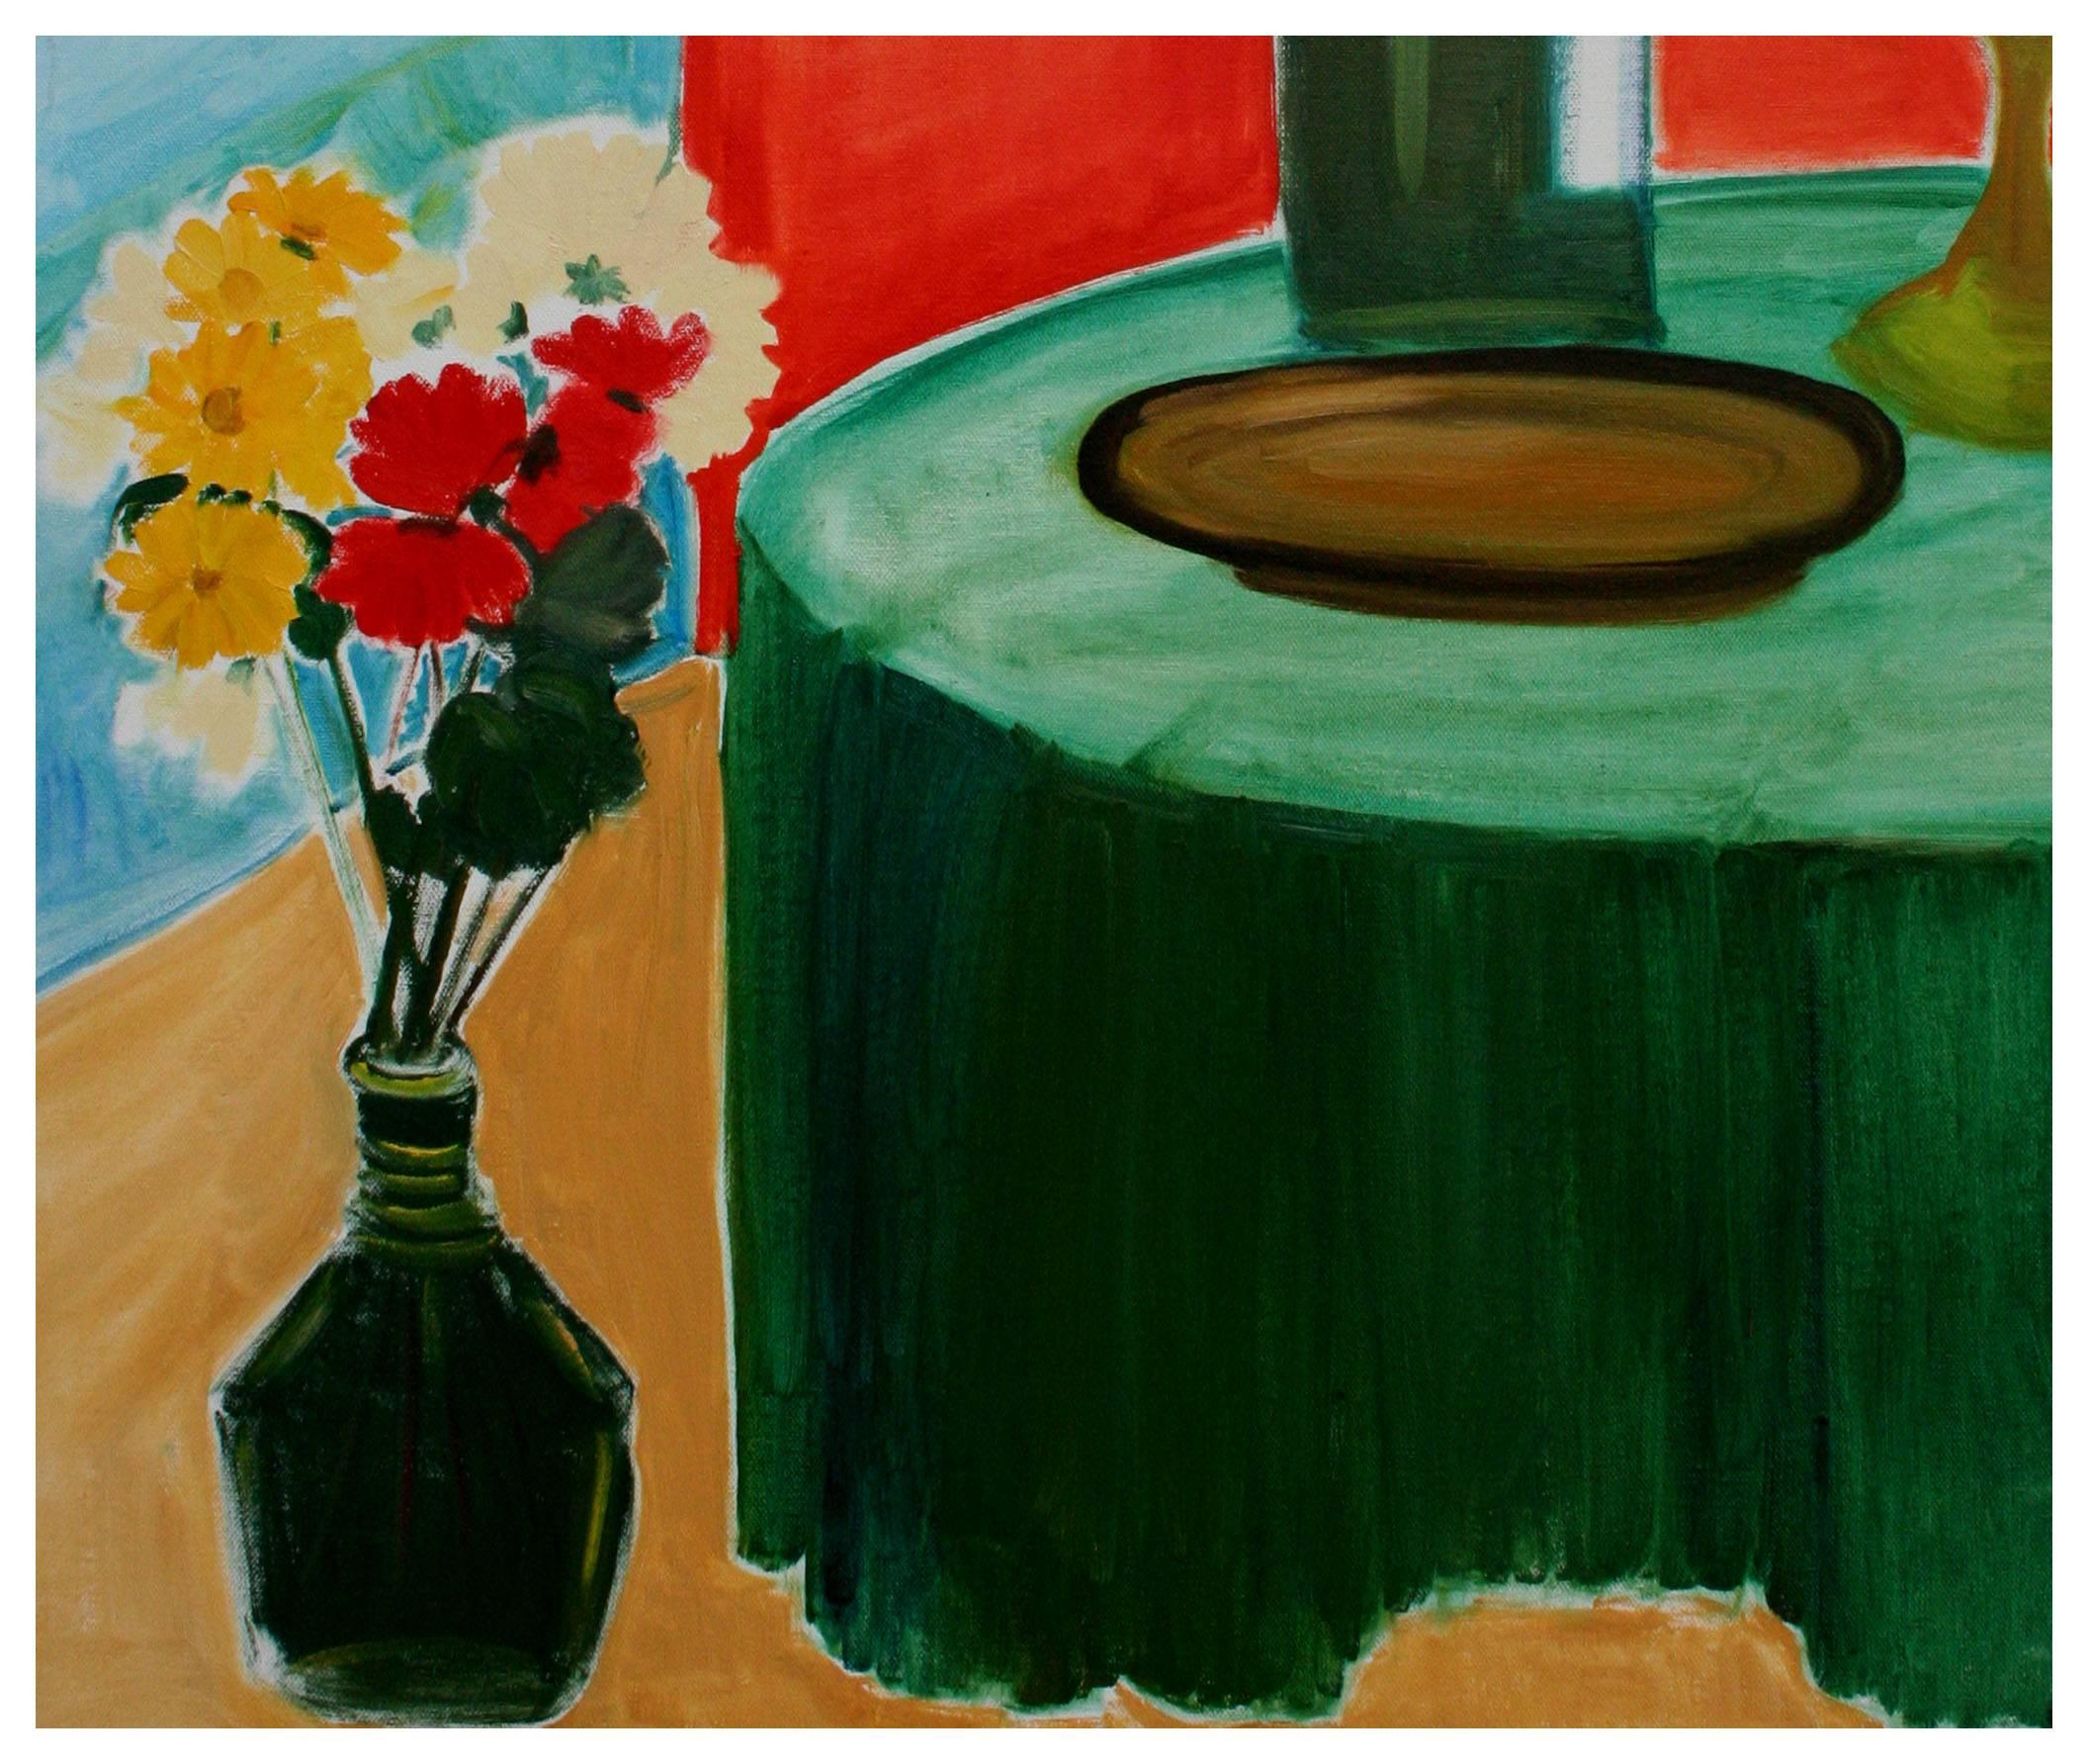 Flowers and Wine Still Life - Painting by Molly E. Brubaker